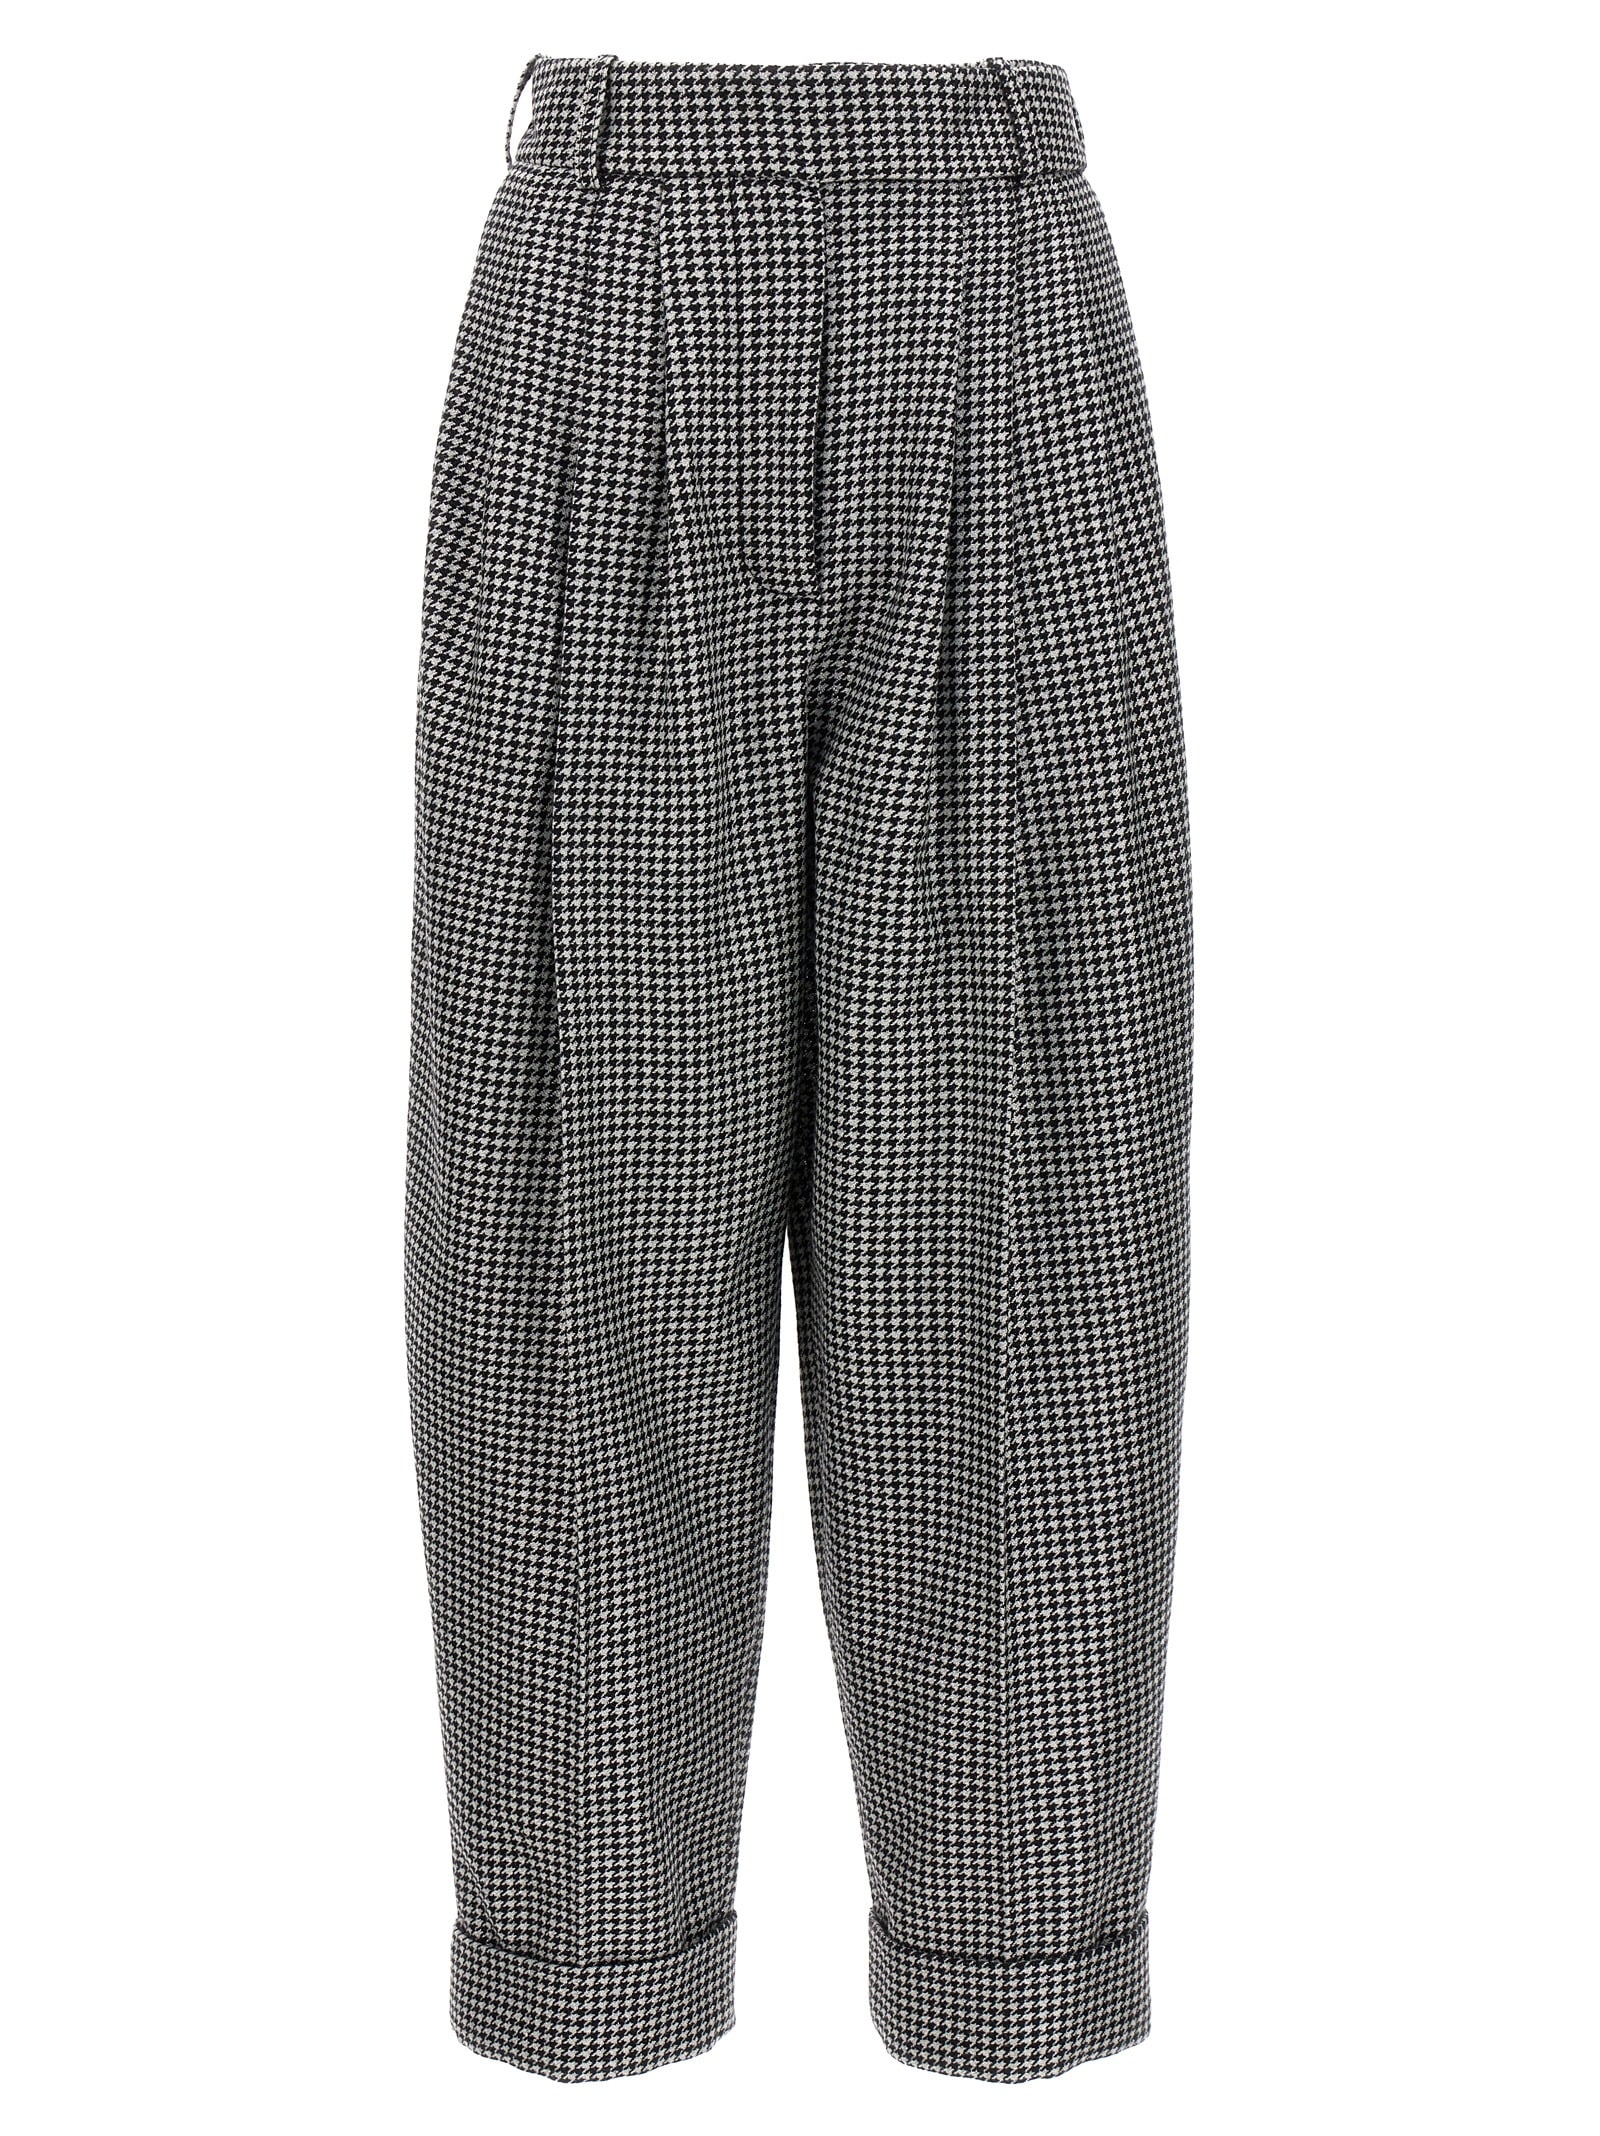 Alexandre Vauthier Metal Houndstooth Trousers